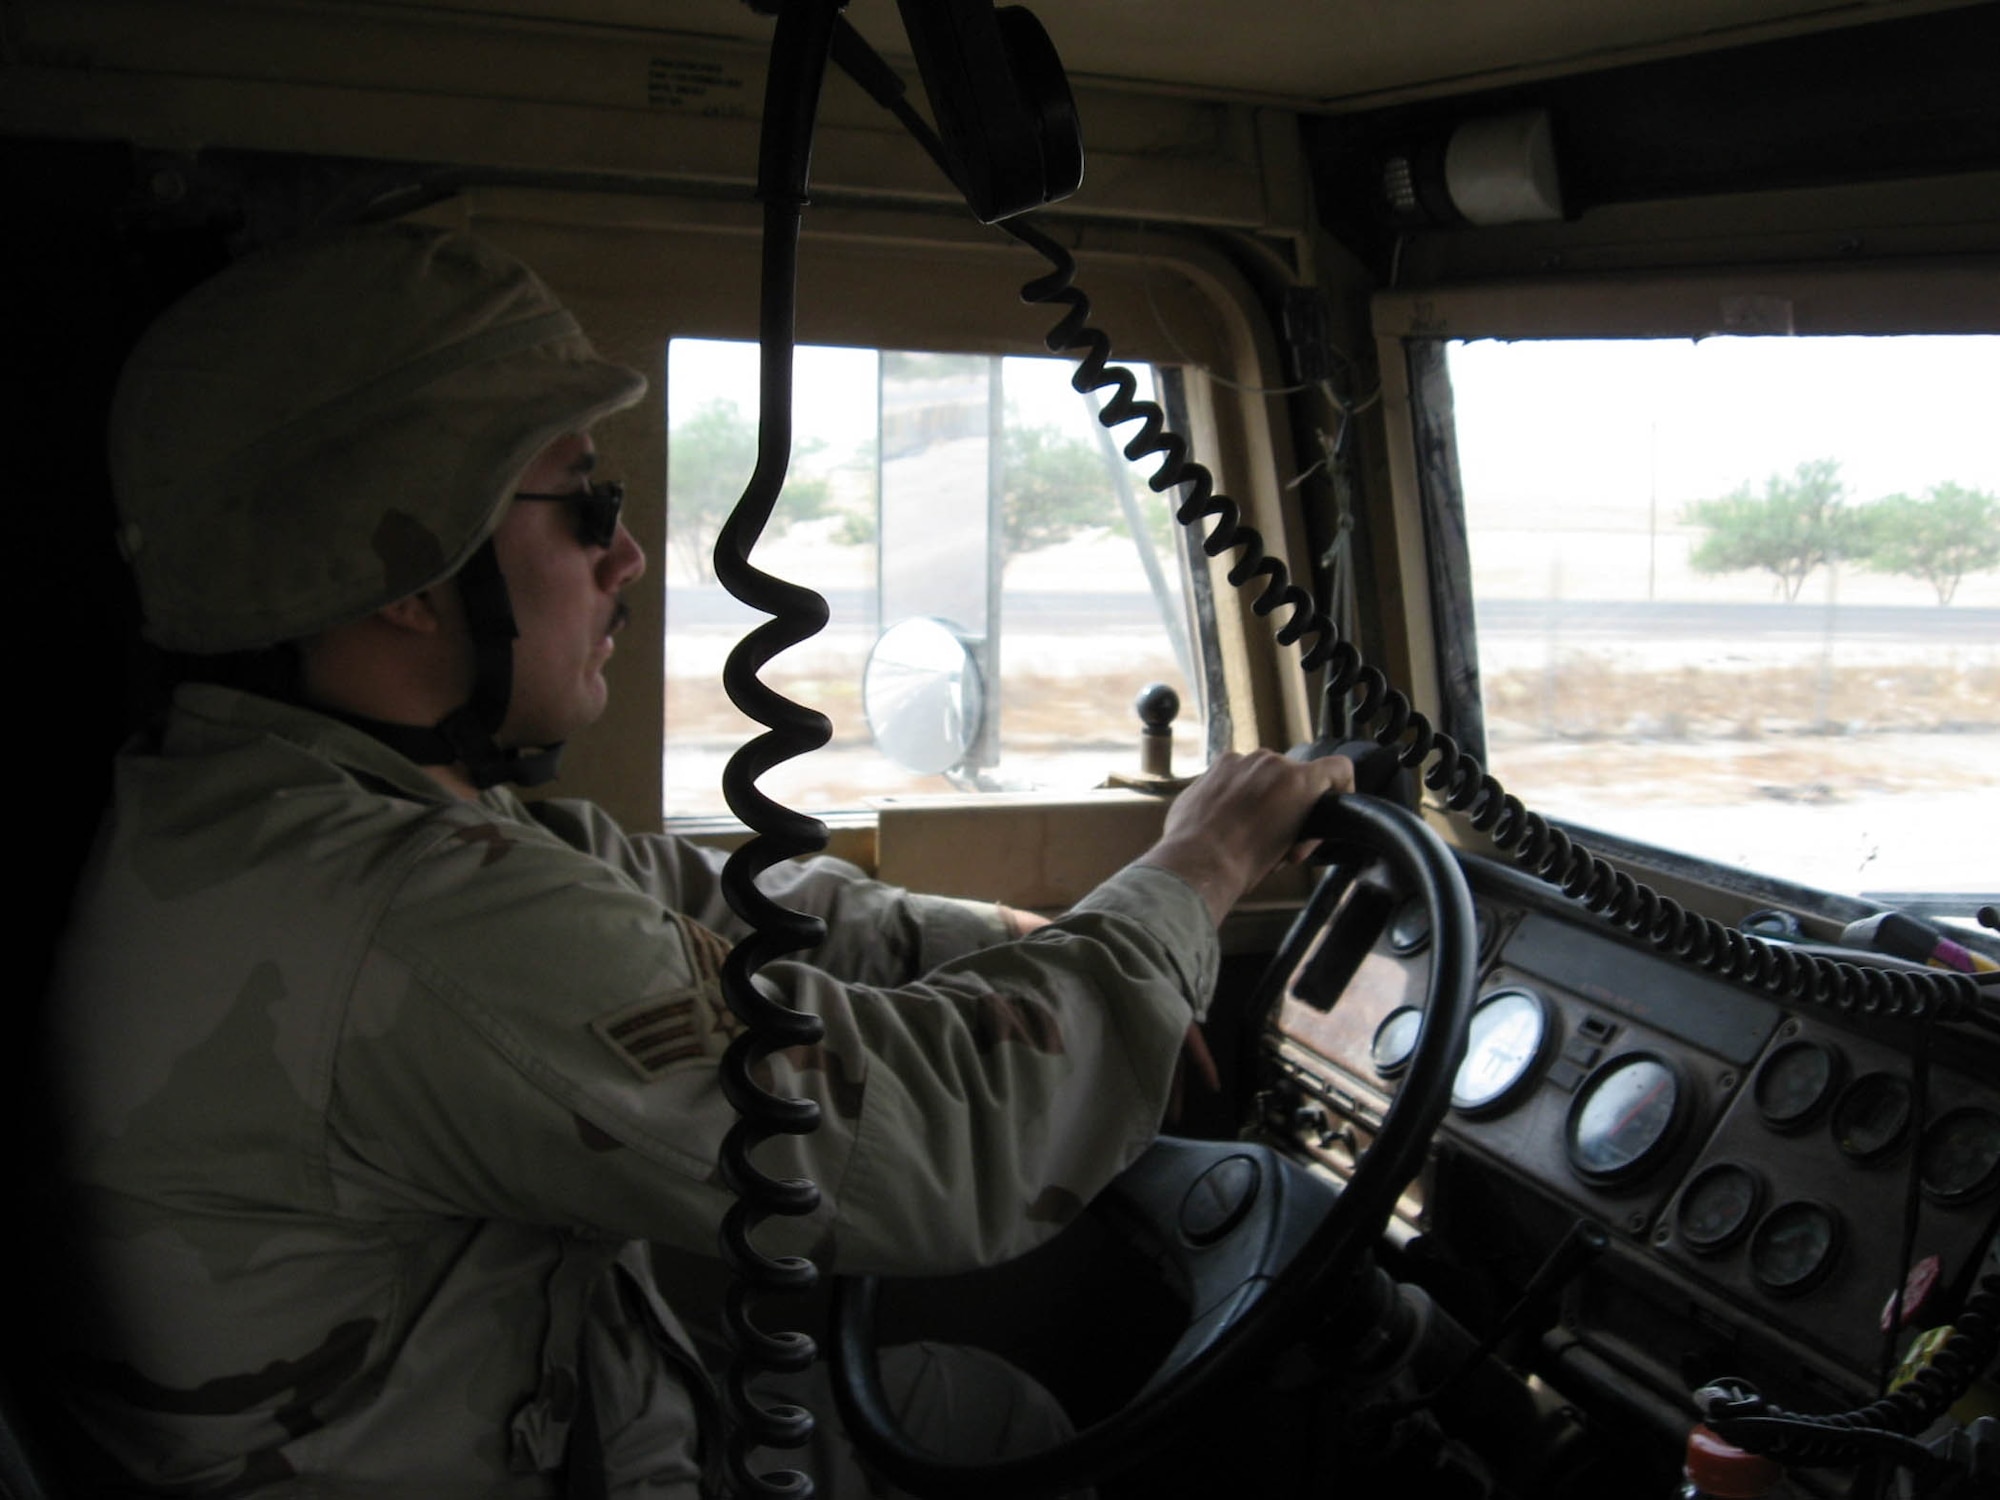 A member of an Air Force Medium Truck Detachment drives during a convoy mission. During a 210-day period, these Airmen complete more than 180 convoys, put 2.5 million convoy miles on the road and encounter more than 40 improvised explosive devices and small arms fire. (U.S Air Force photo)